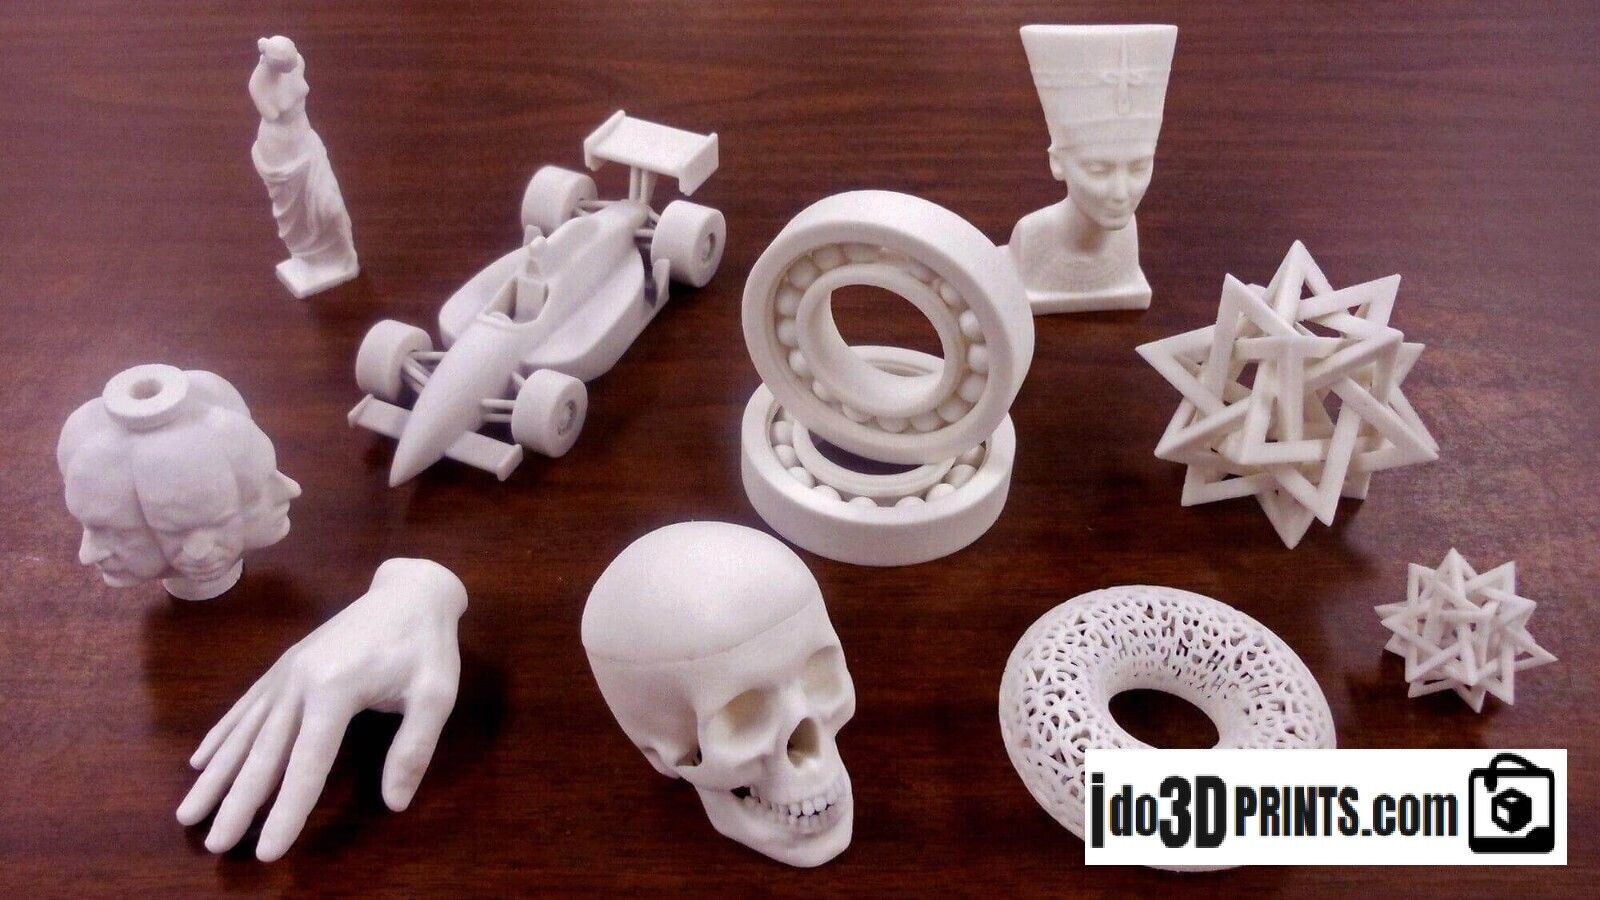 3D Printing Service ⭐️⭐️⭐️⭐️⭐️ 💜10% of sales to Wounded Warrior Project💜 Без бренда